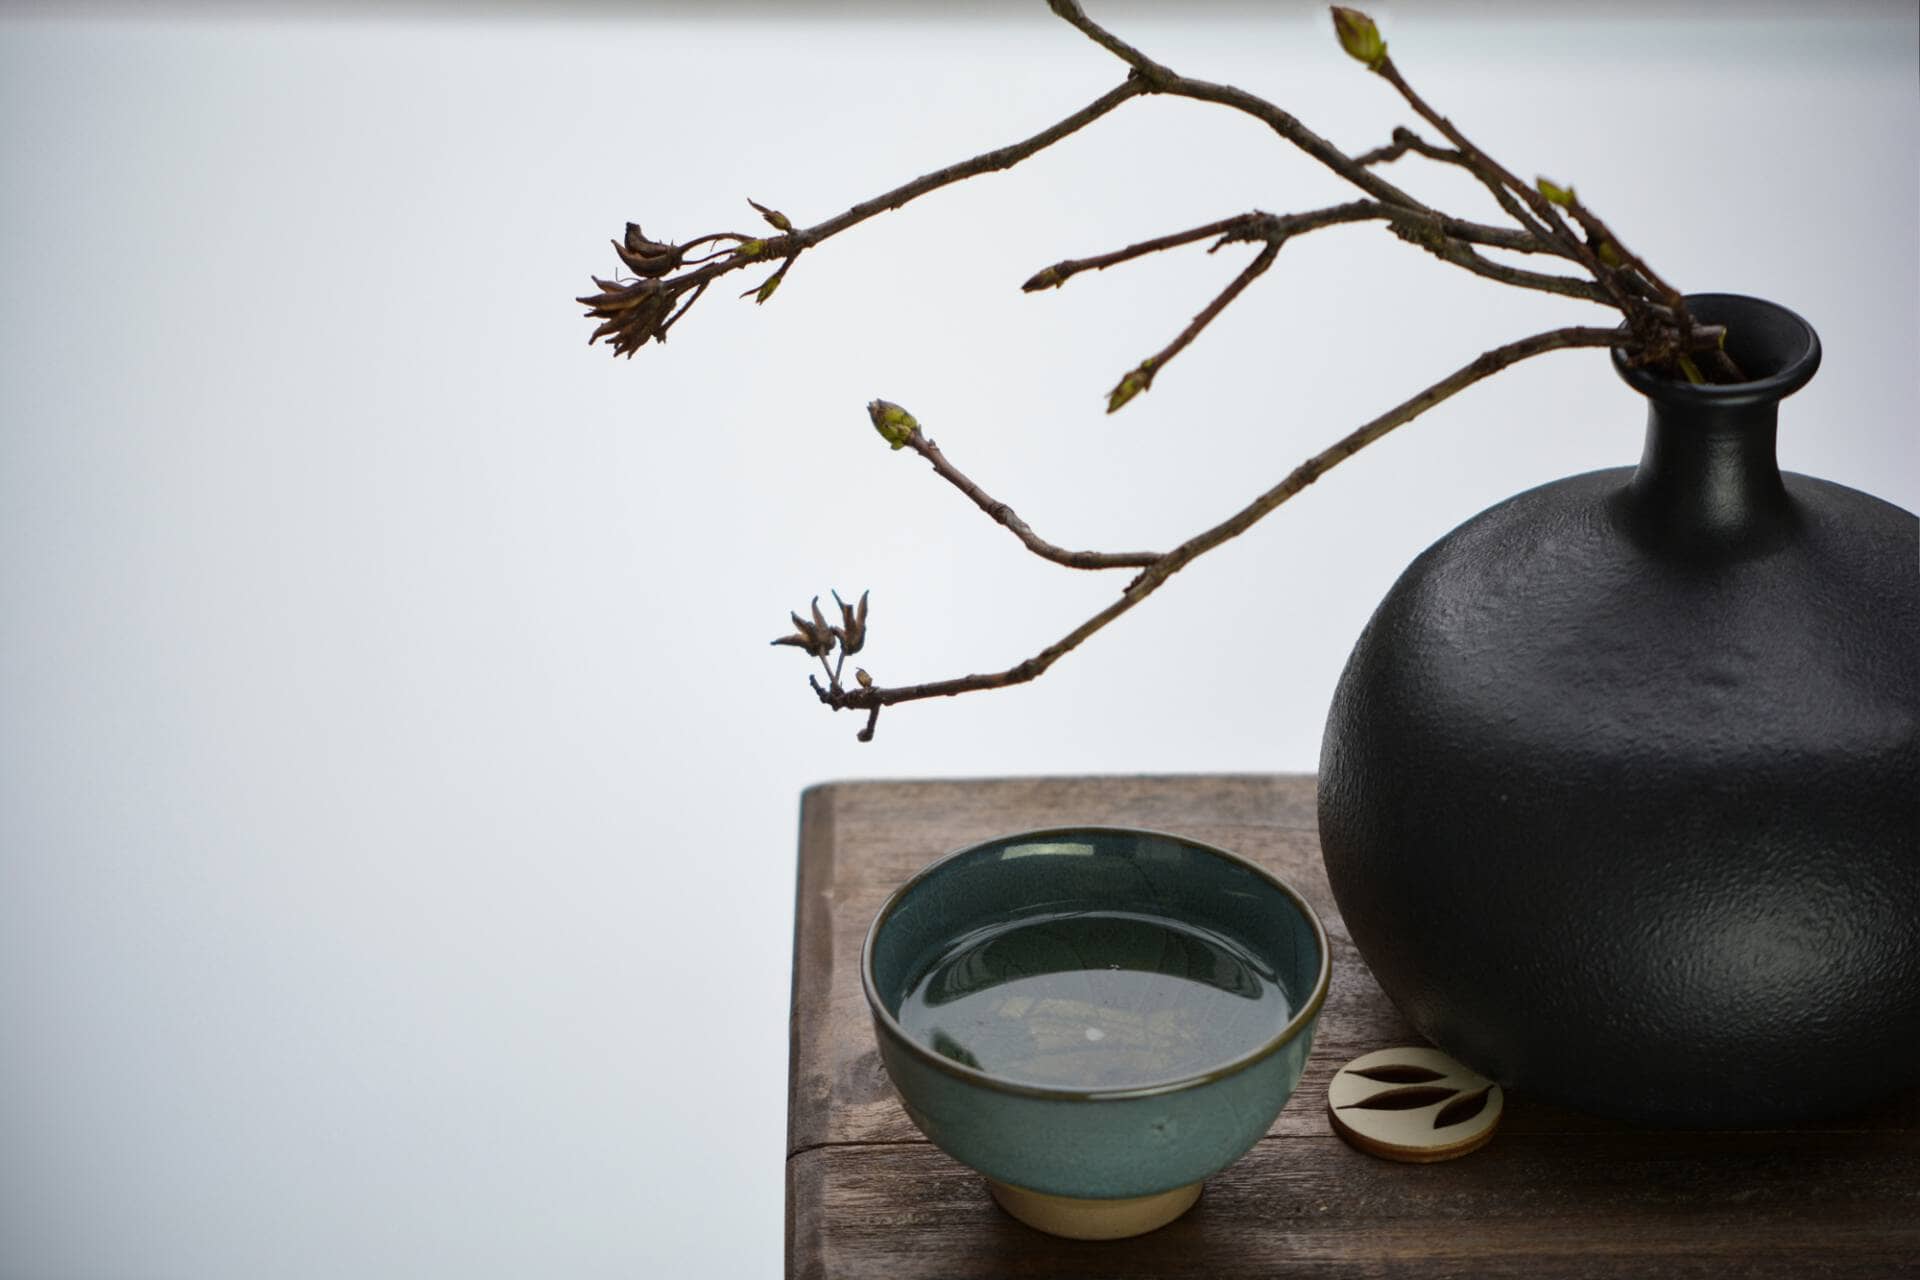 Tea Passion_Sven-Christian Lange_Branding Photography_Black Cast Iron Vase And Branch With Buds With Turquoise Matcha Bowl On Ancient Wooden Stand_Tea Ceremony_Wabi Sabi